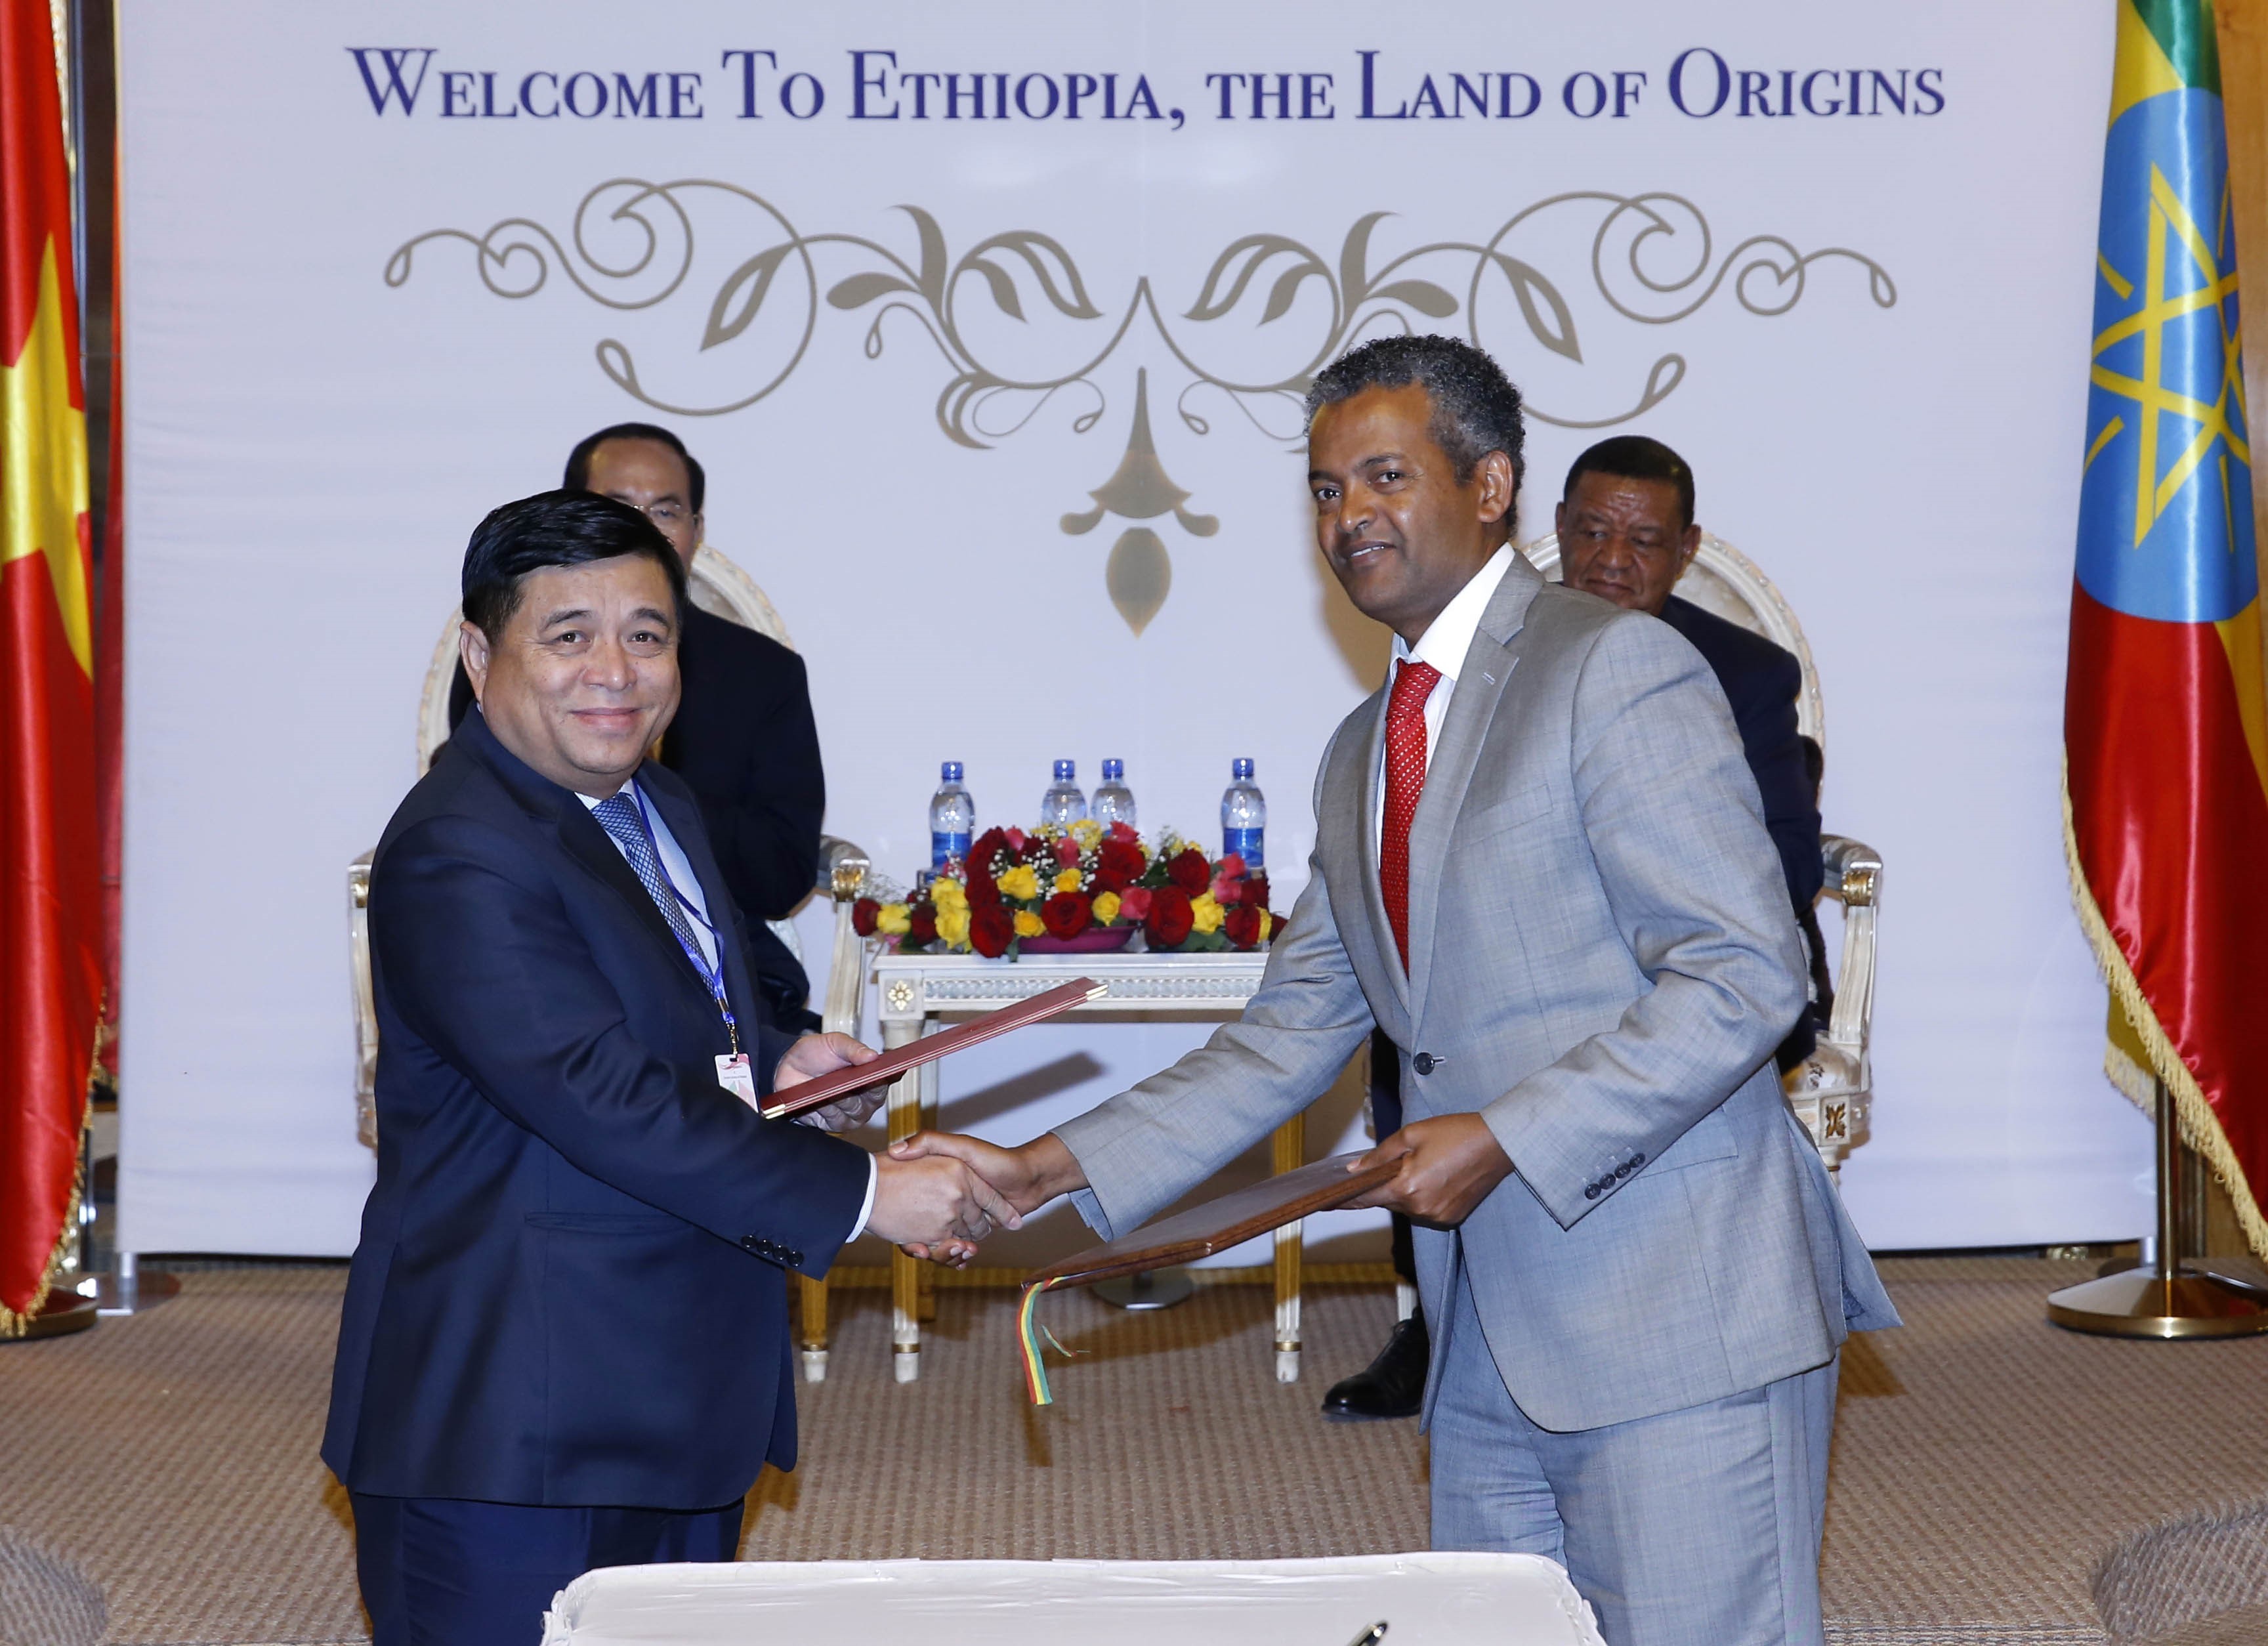 A memorandum of understanding (MoU) on investment cooperation inked between the Vietnamese Ministry of Planning and Investment and the Ethiopian Investment Commission (Photo: VNA)